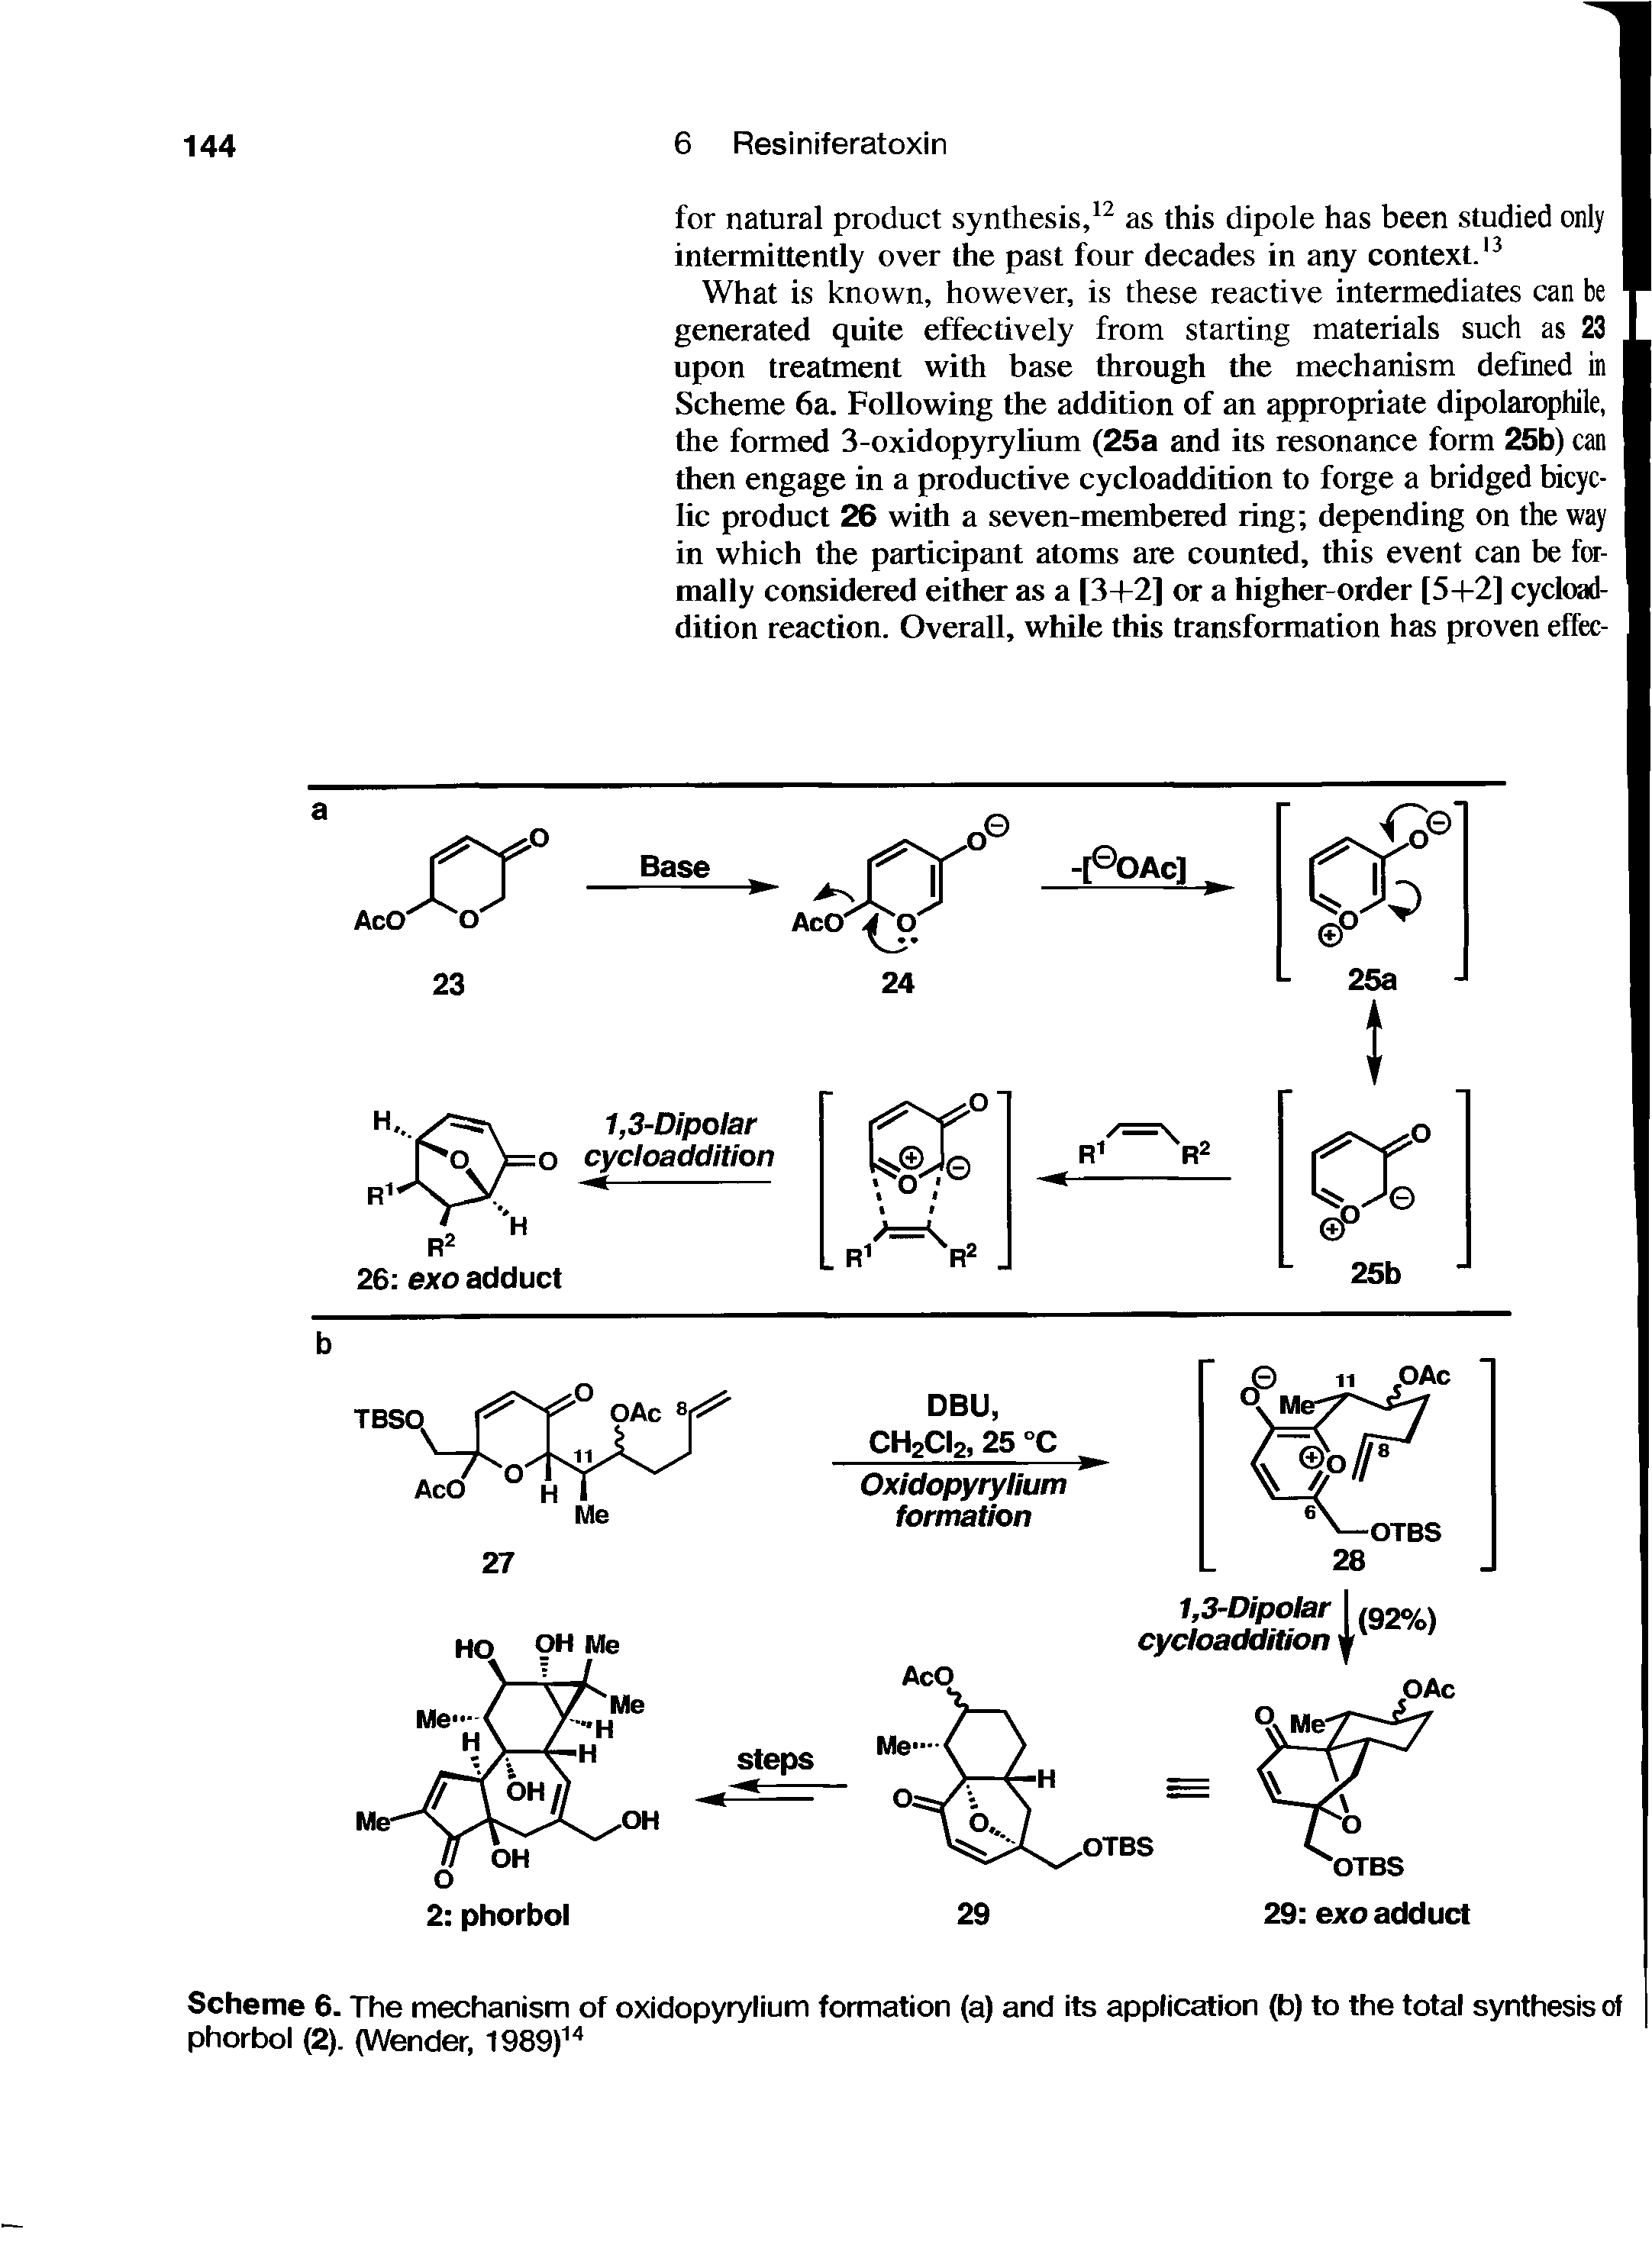 Scheme 6. The mechanism of oxidopyrylium formation (a) and its application (b) to the total synthesis of phorboi (2). (Wender, 1989)i ...